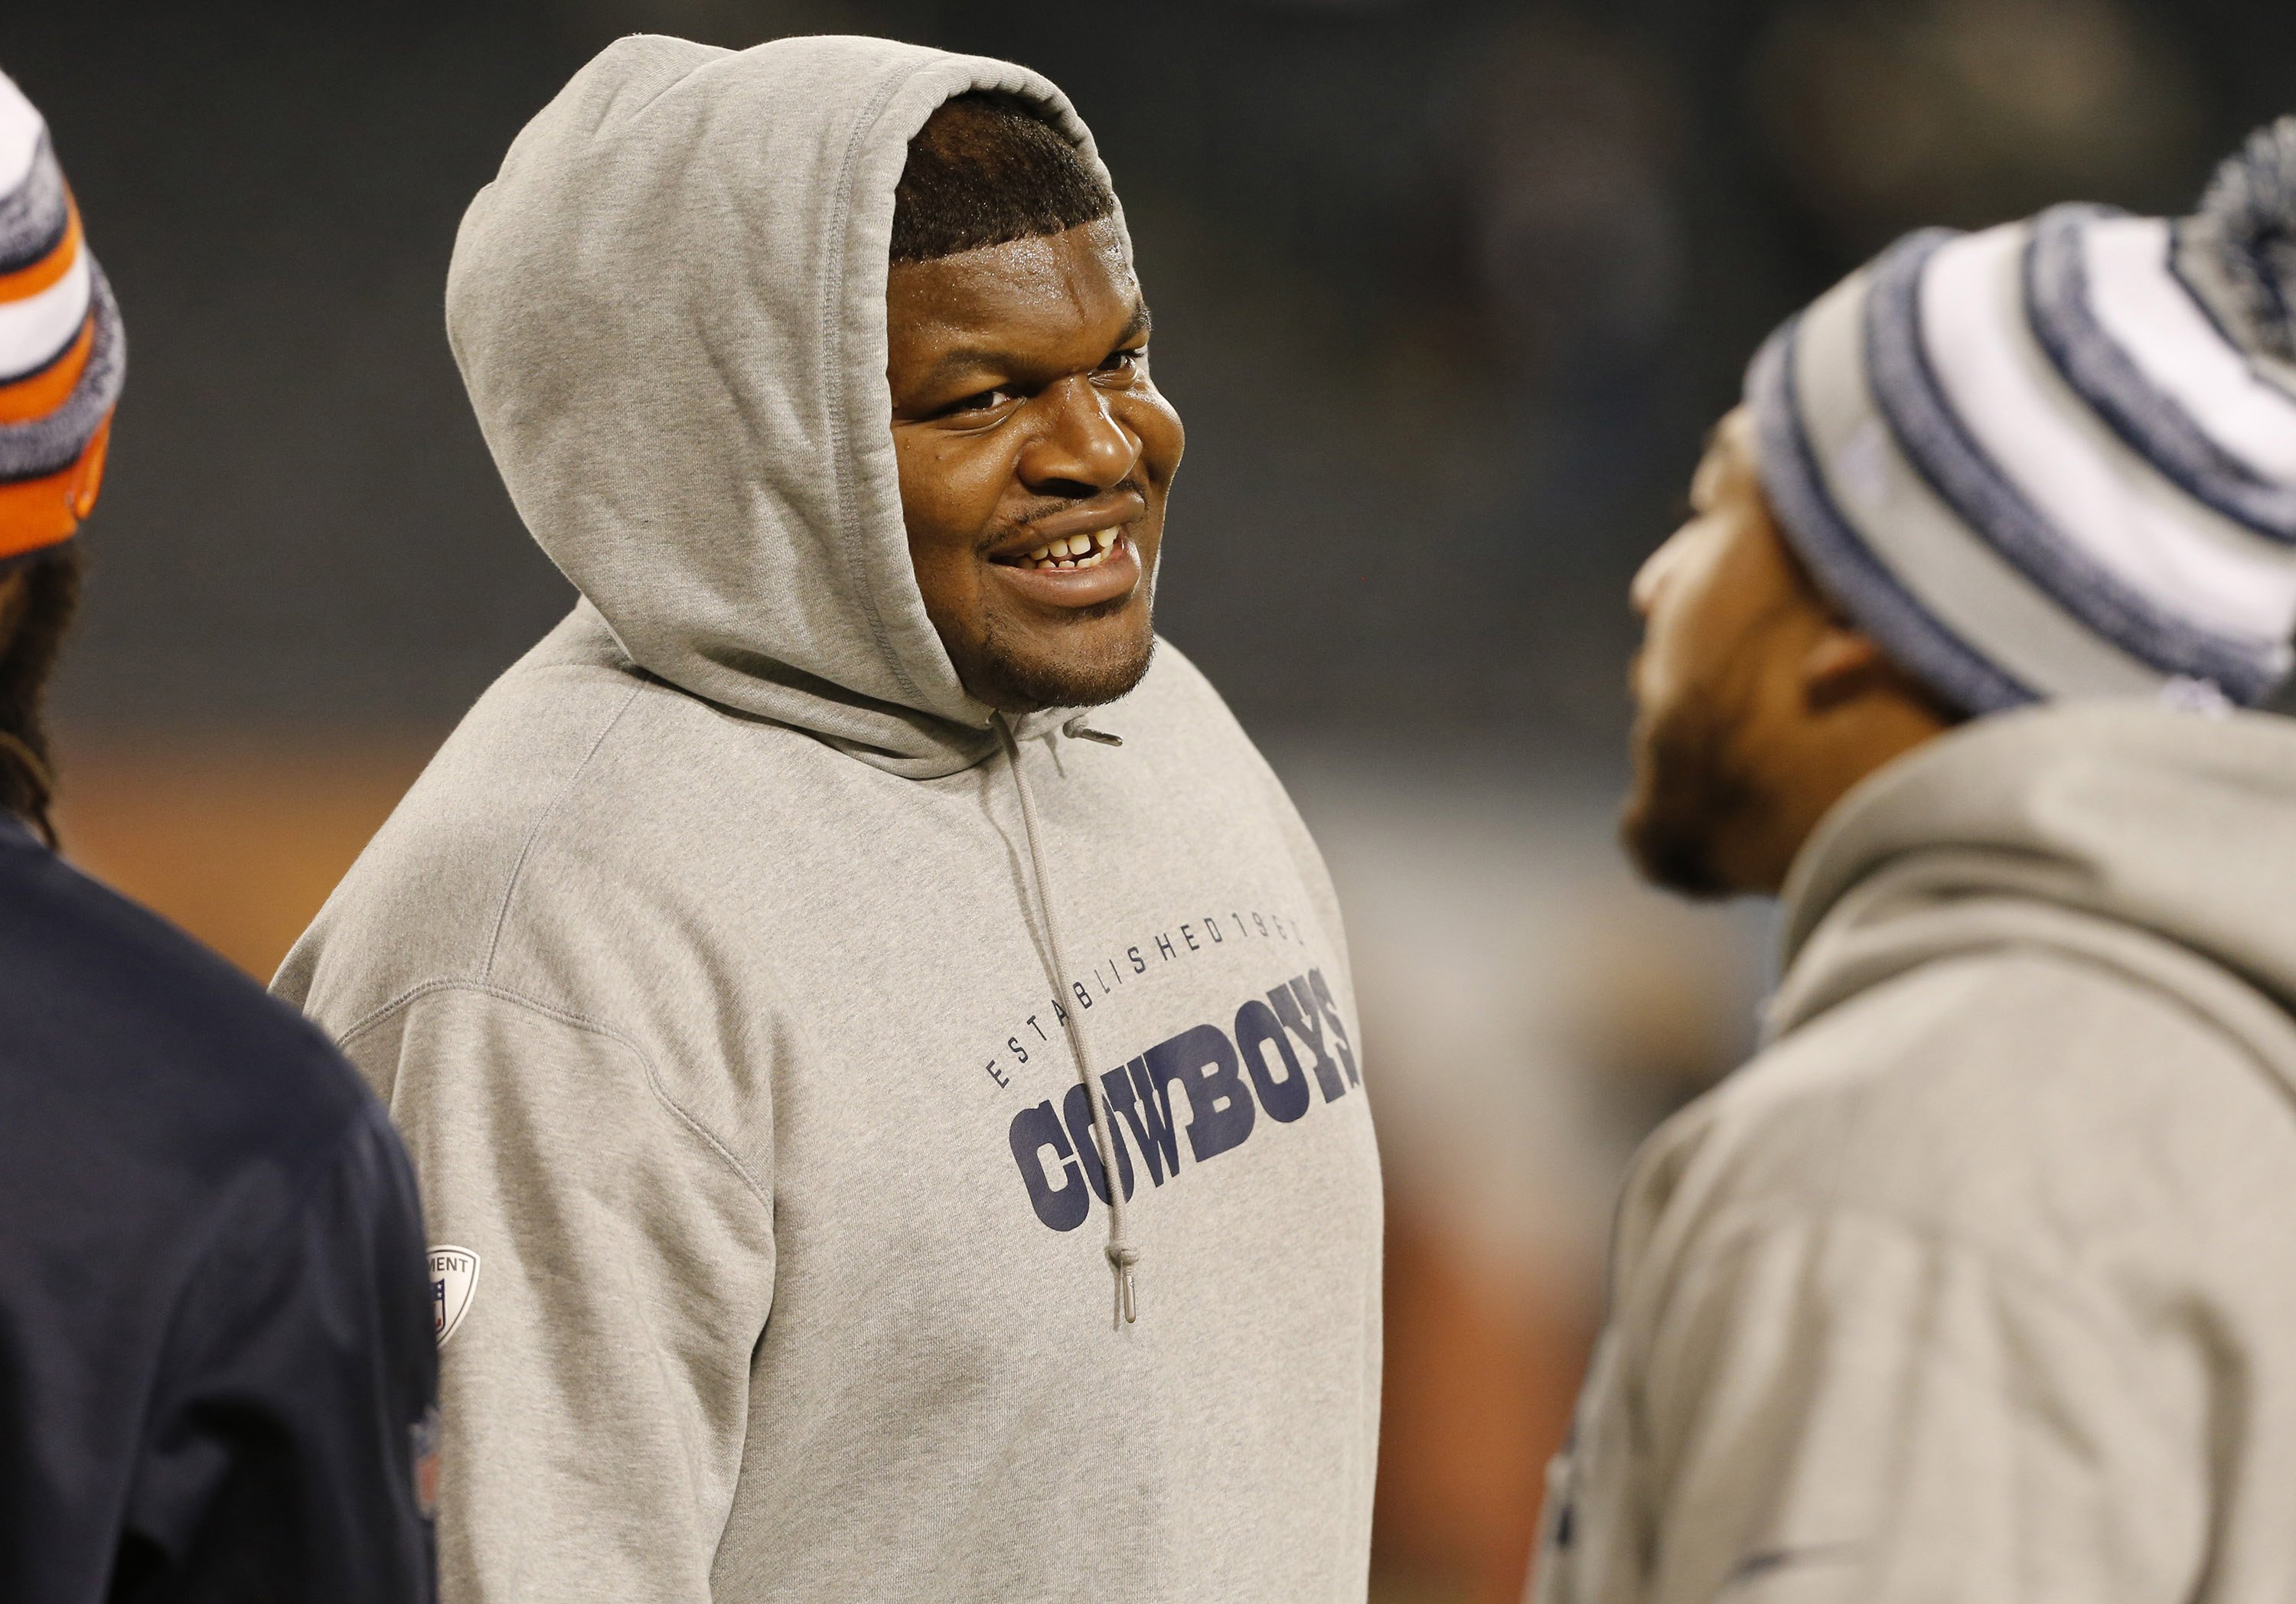 Josh Brent at Soldier Field in Chicago on Thursday, Dec. 4, 2014 | Photo: Getty Images